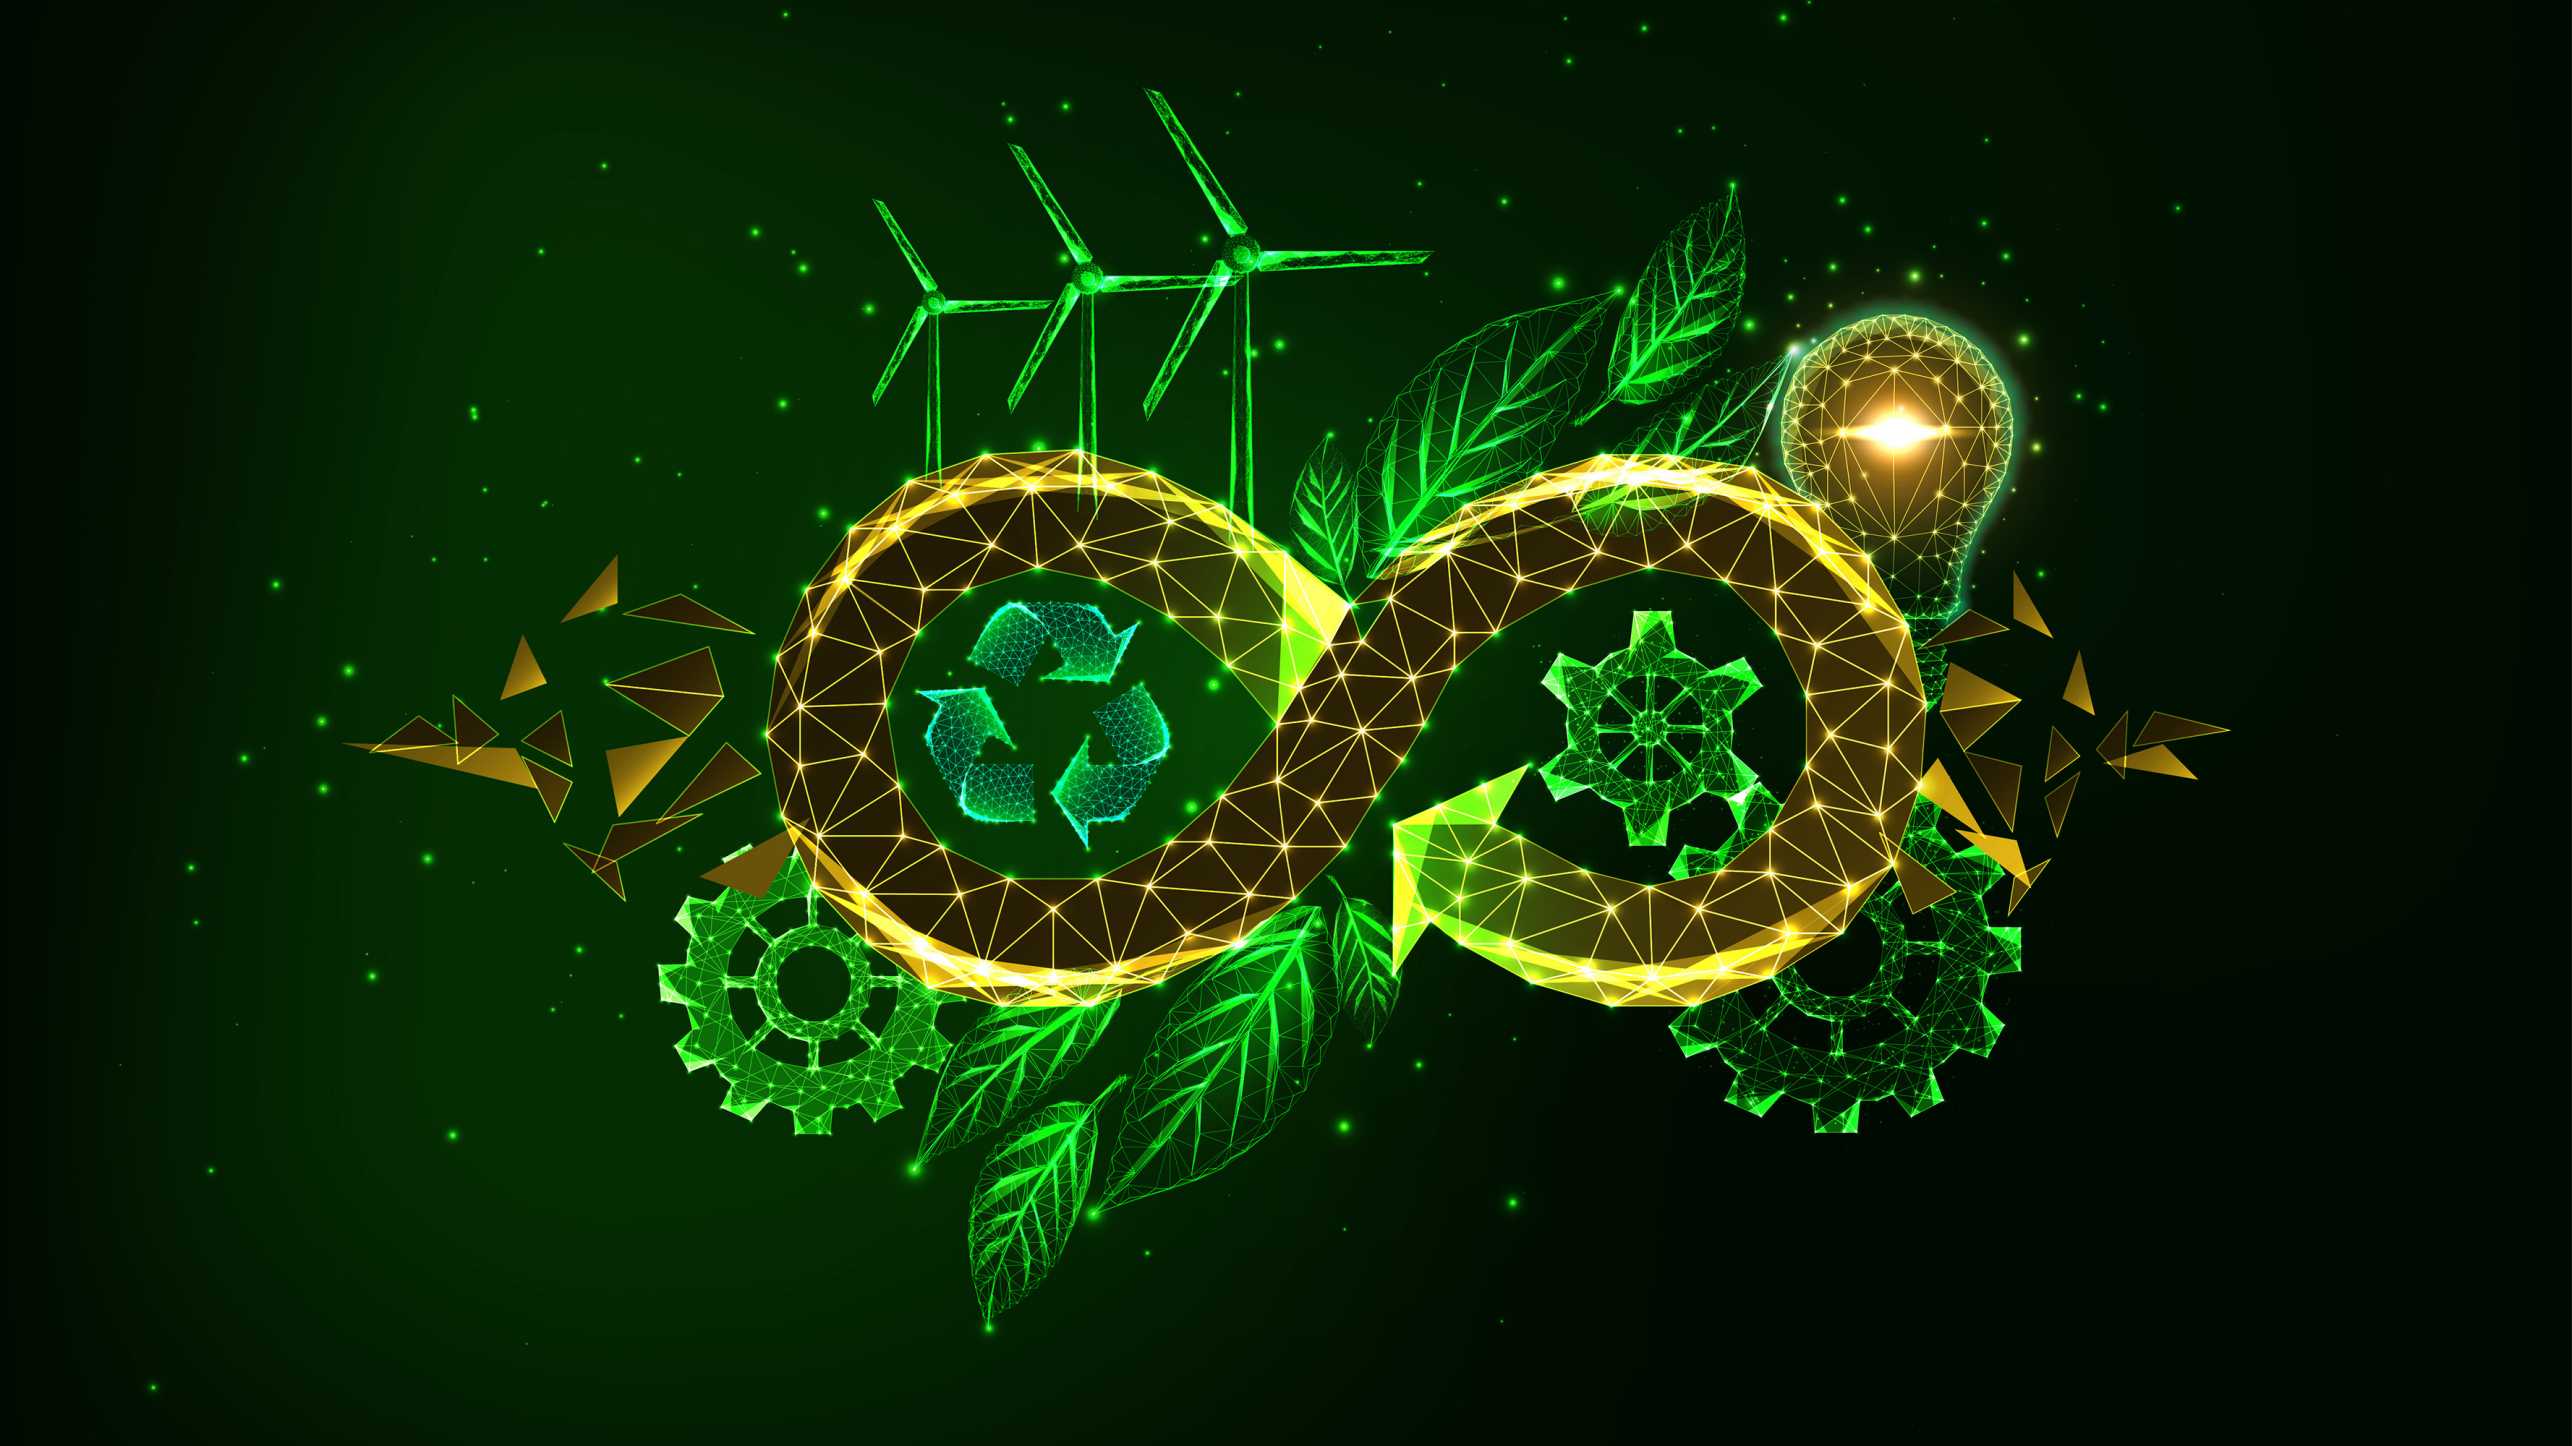 A yellowish glowing infinity sign surrounded with energy poles and green plants.